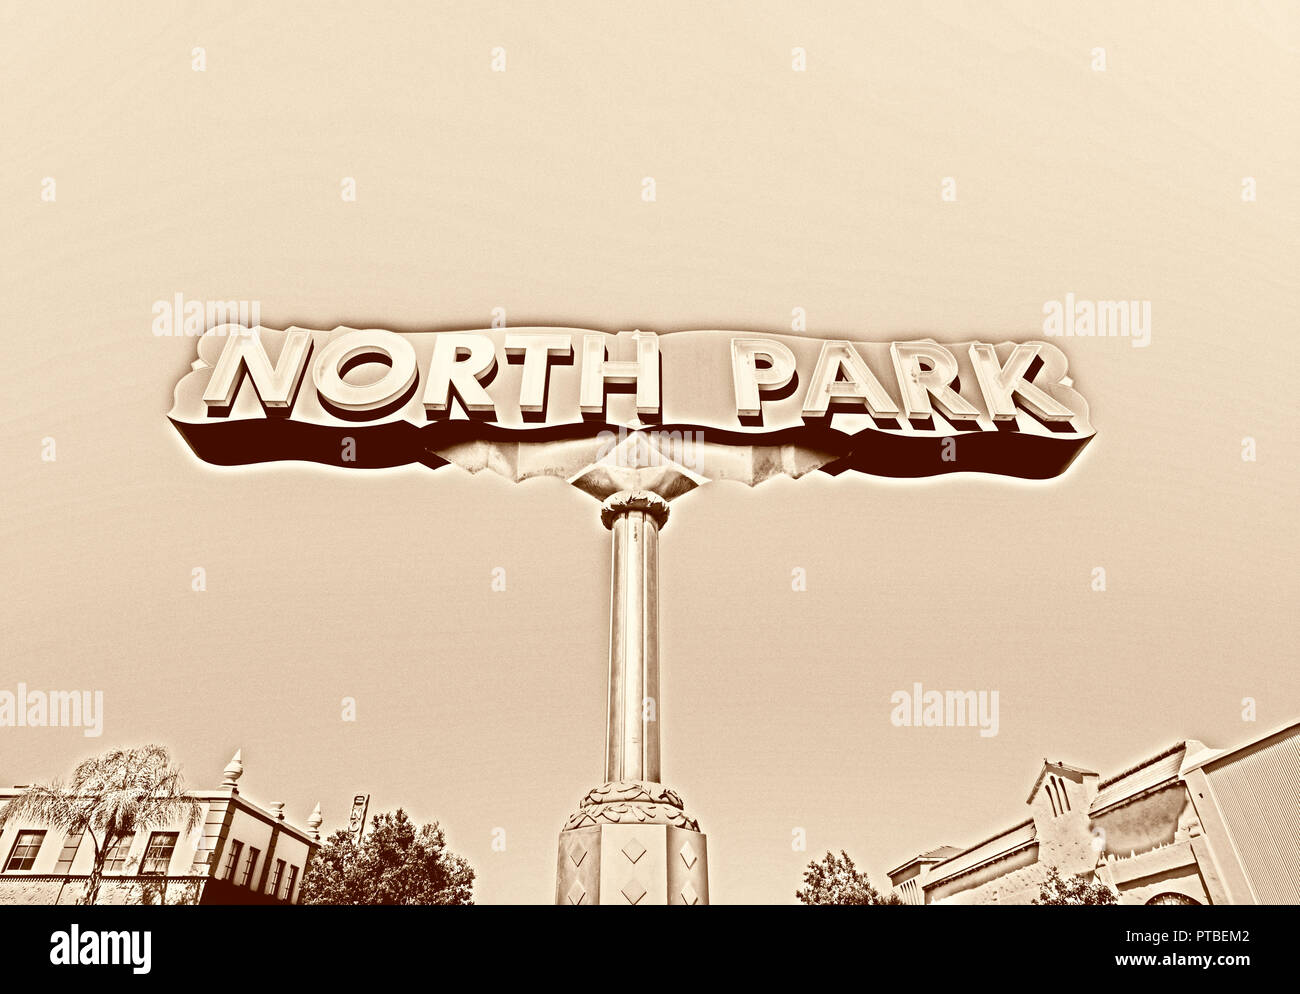 10 Northpark Mall Images, Stock Photos, 3D objects, & Vectors